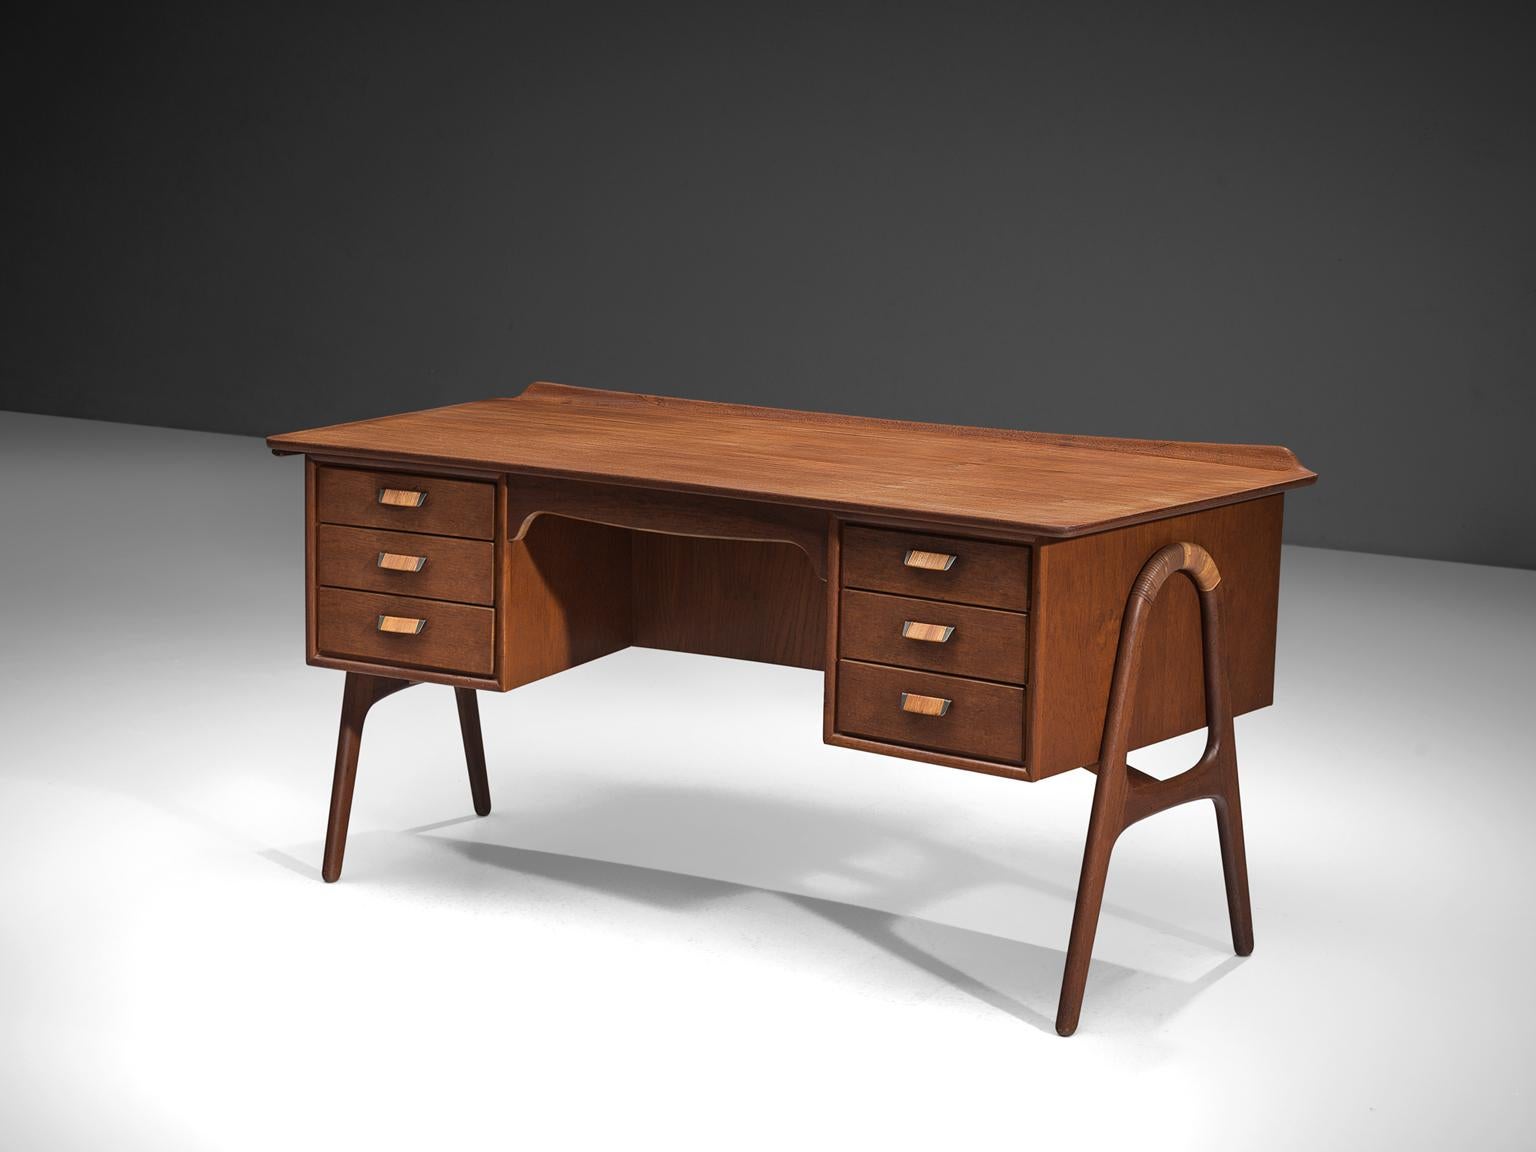 Svend Aage Madsen for Sigurd Hansen, desk, teak, cane, Denmark, 1960s.

This writing table is designed by the Dane Madsen and manufactured by Sigurd Hansen. This ruby colored teak desk features a raised back edge on the top. The double legs are